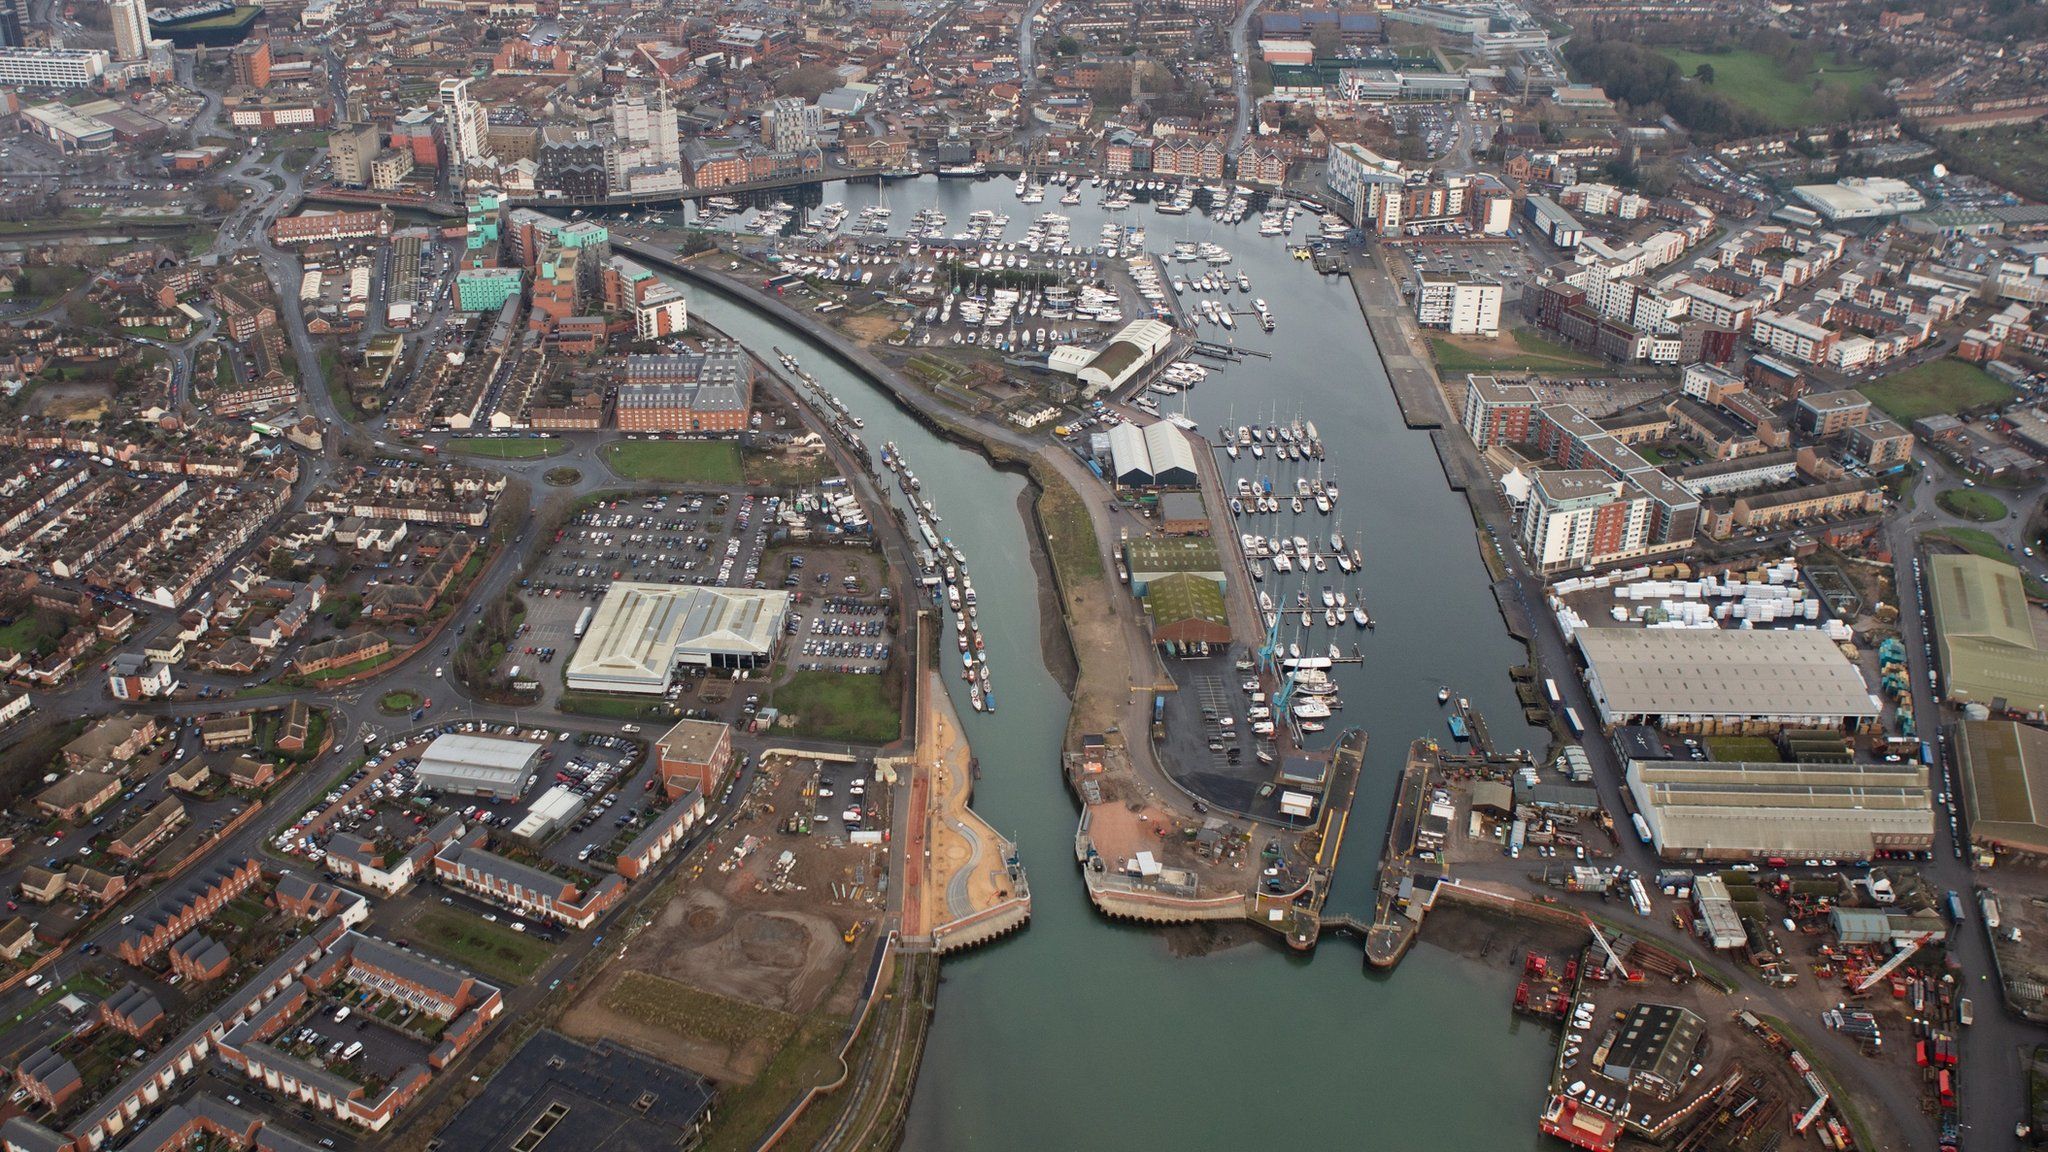 Ipswich waterfront with new tidal flood barrier